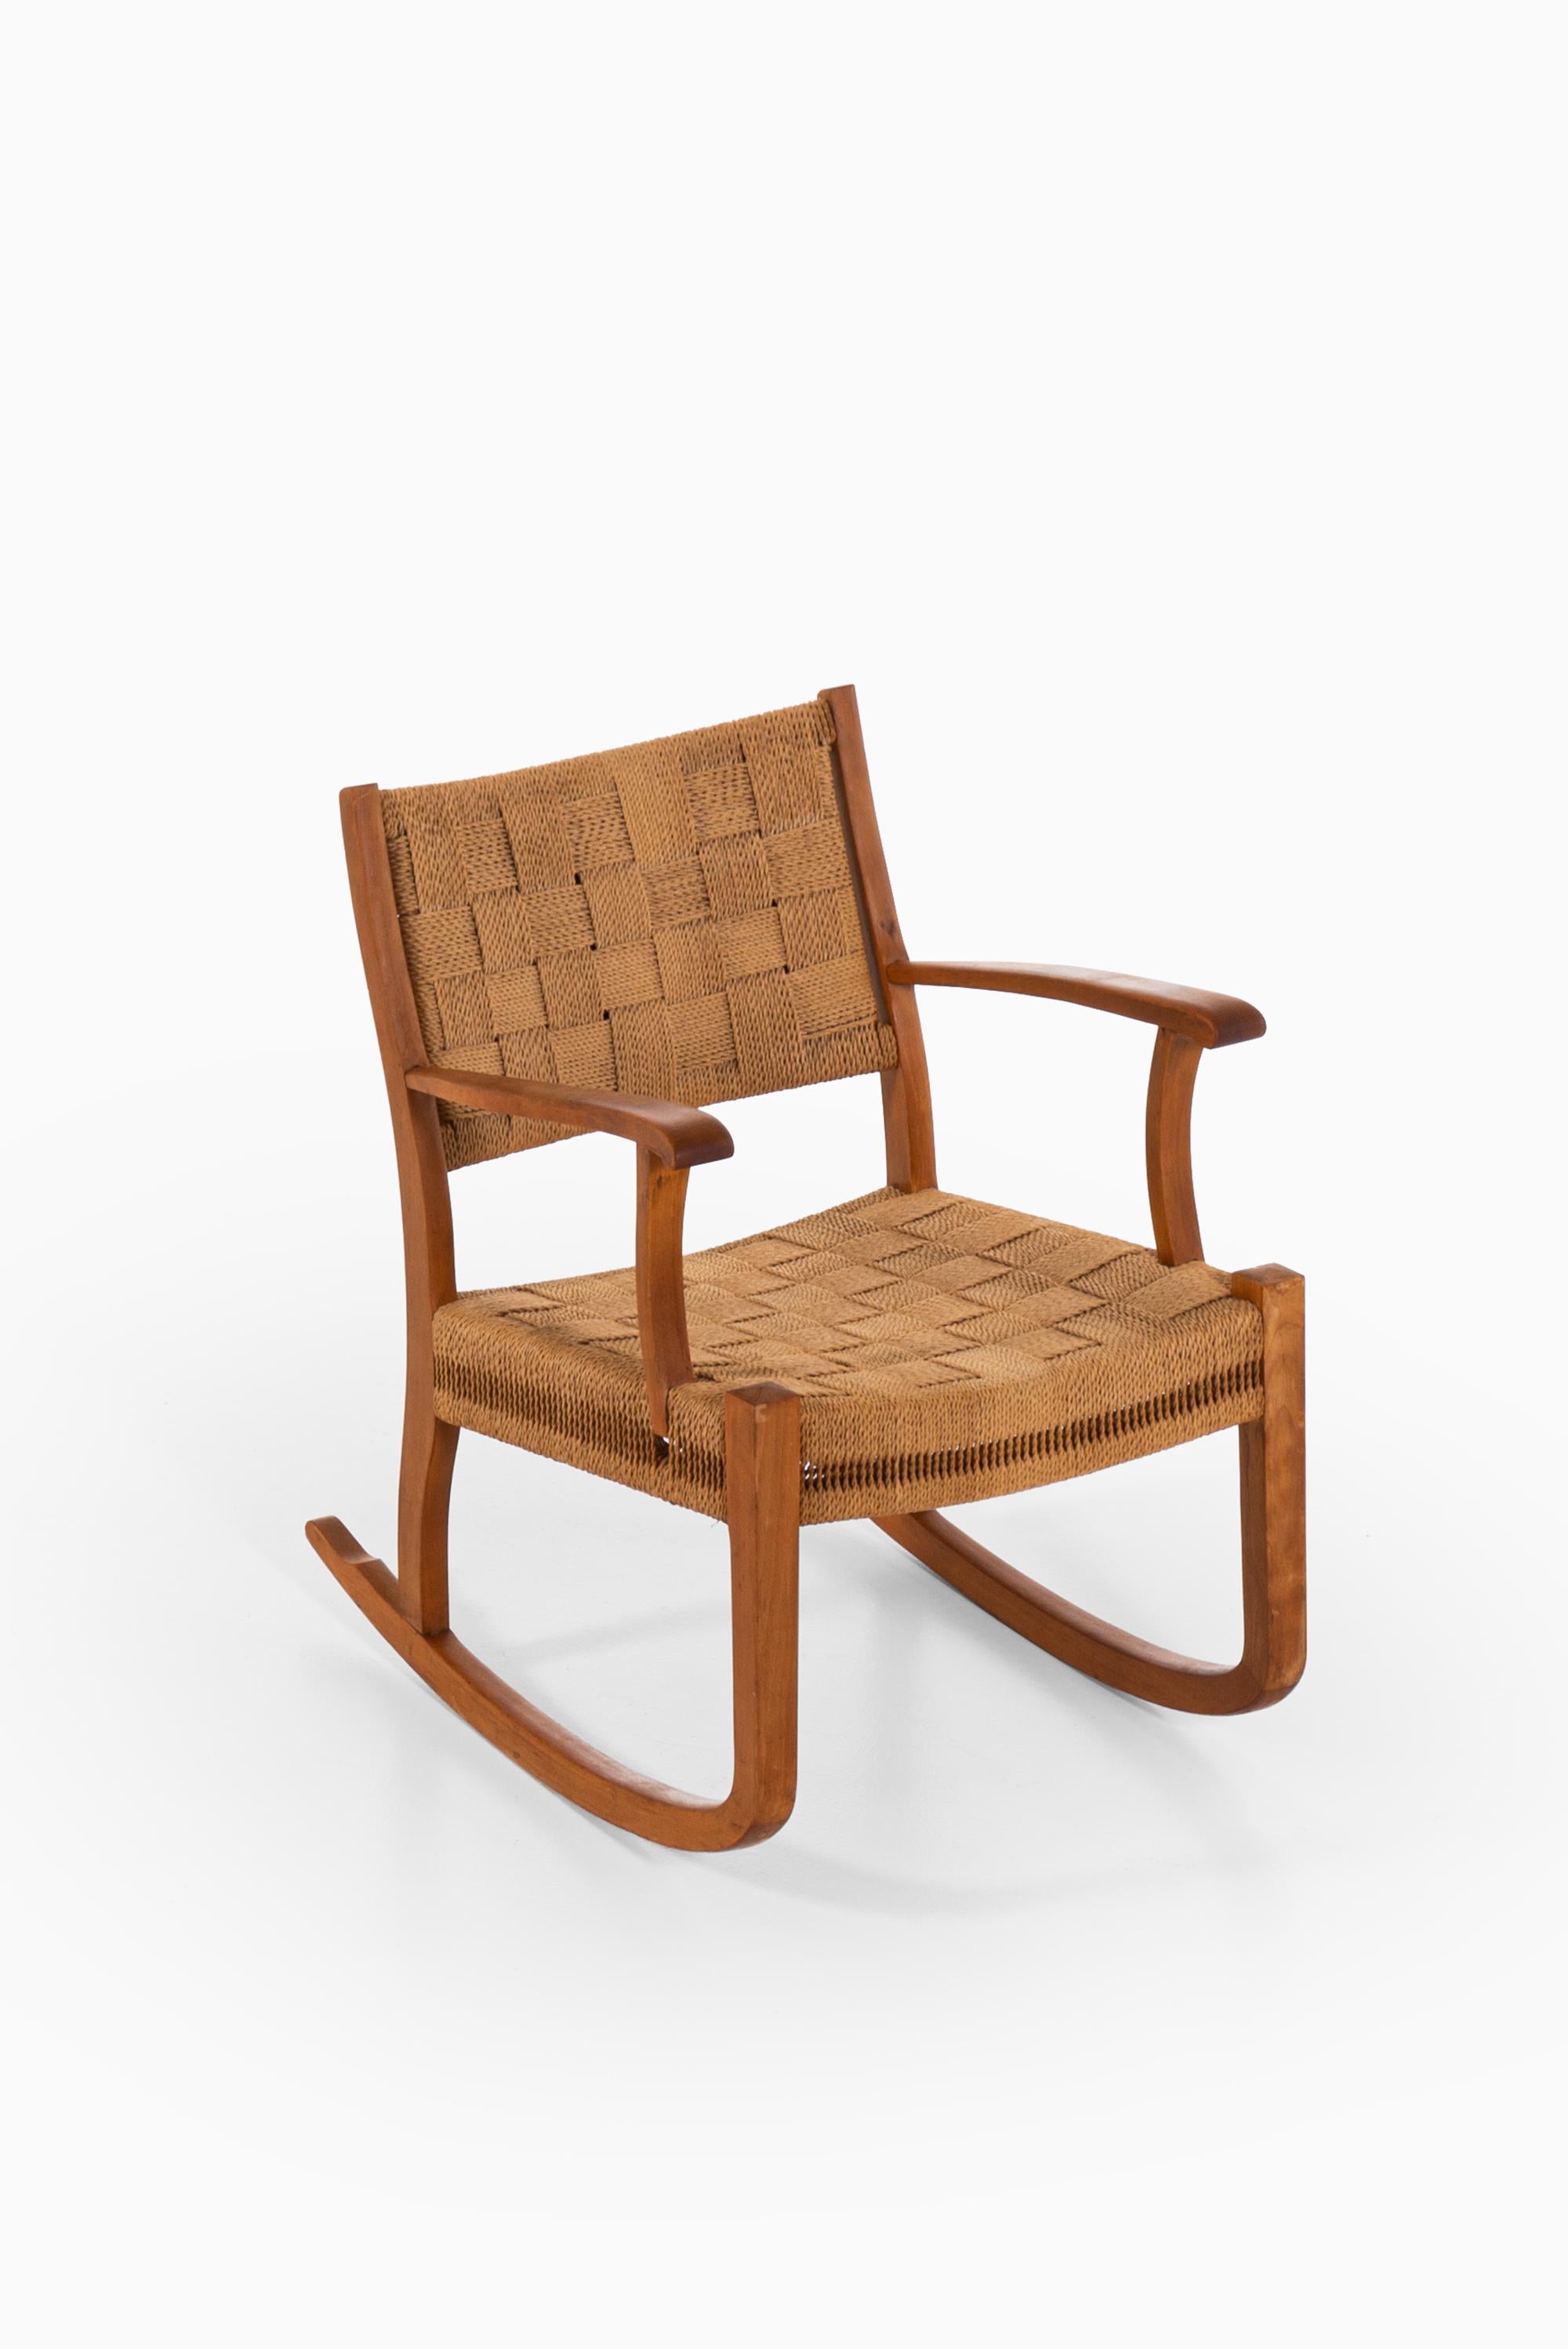 Rocking chair in beech and hemp string attributed to K. Scröder. Probably produced by Fritz Hansen in Denmark.